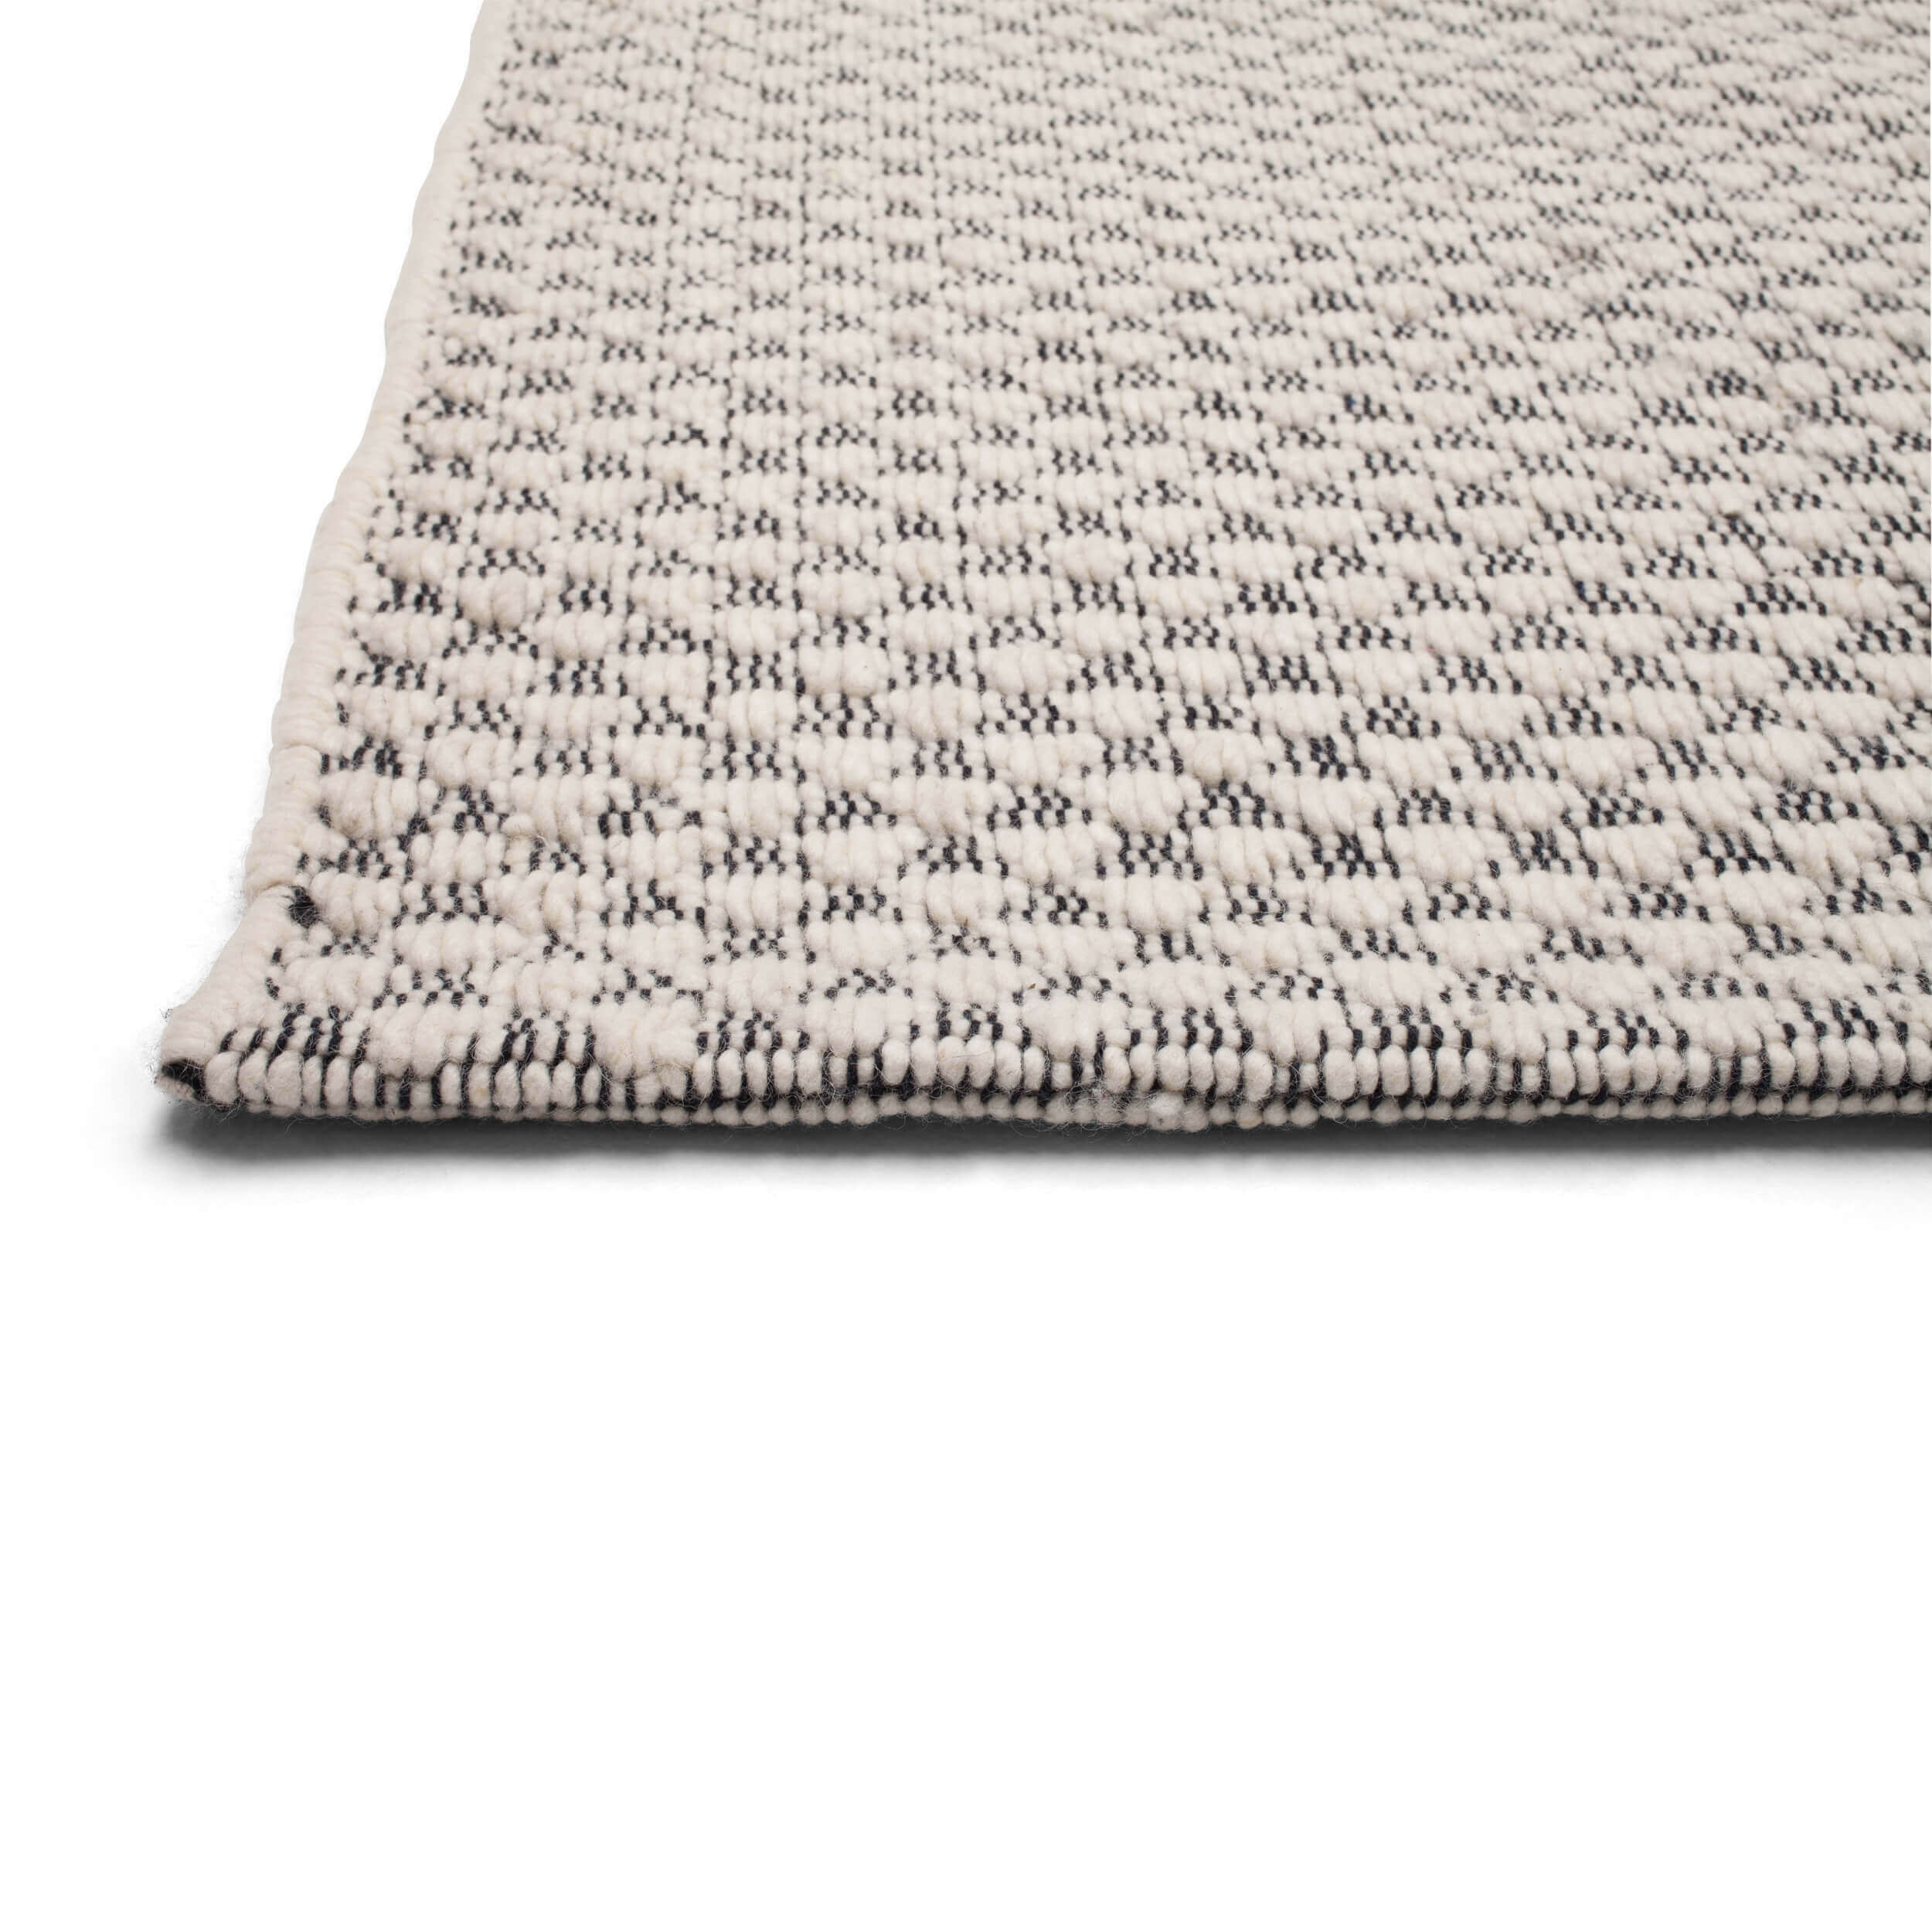 6x9 Area Rugs Cotton Or Wool, Rugs 6 X 9